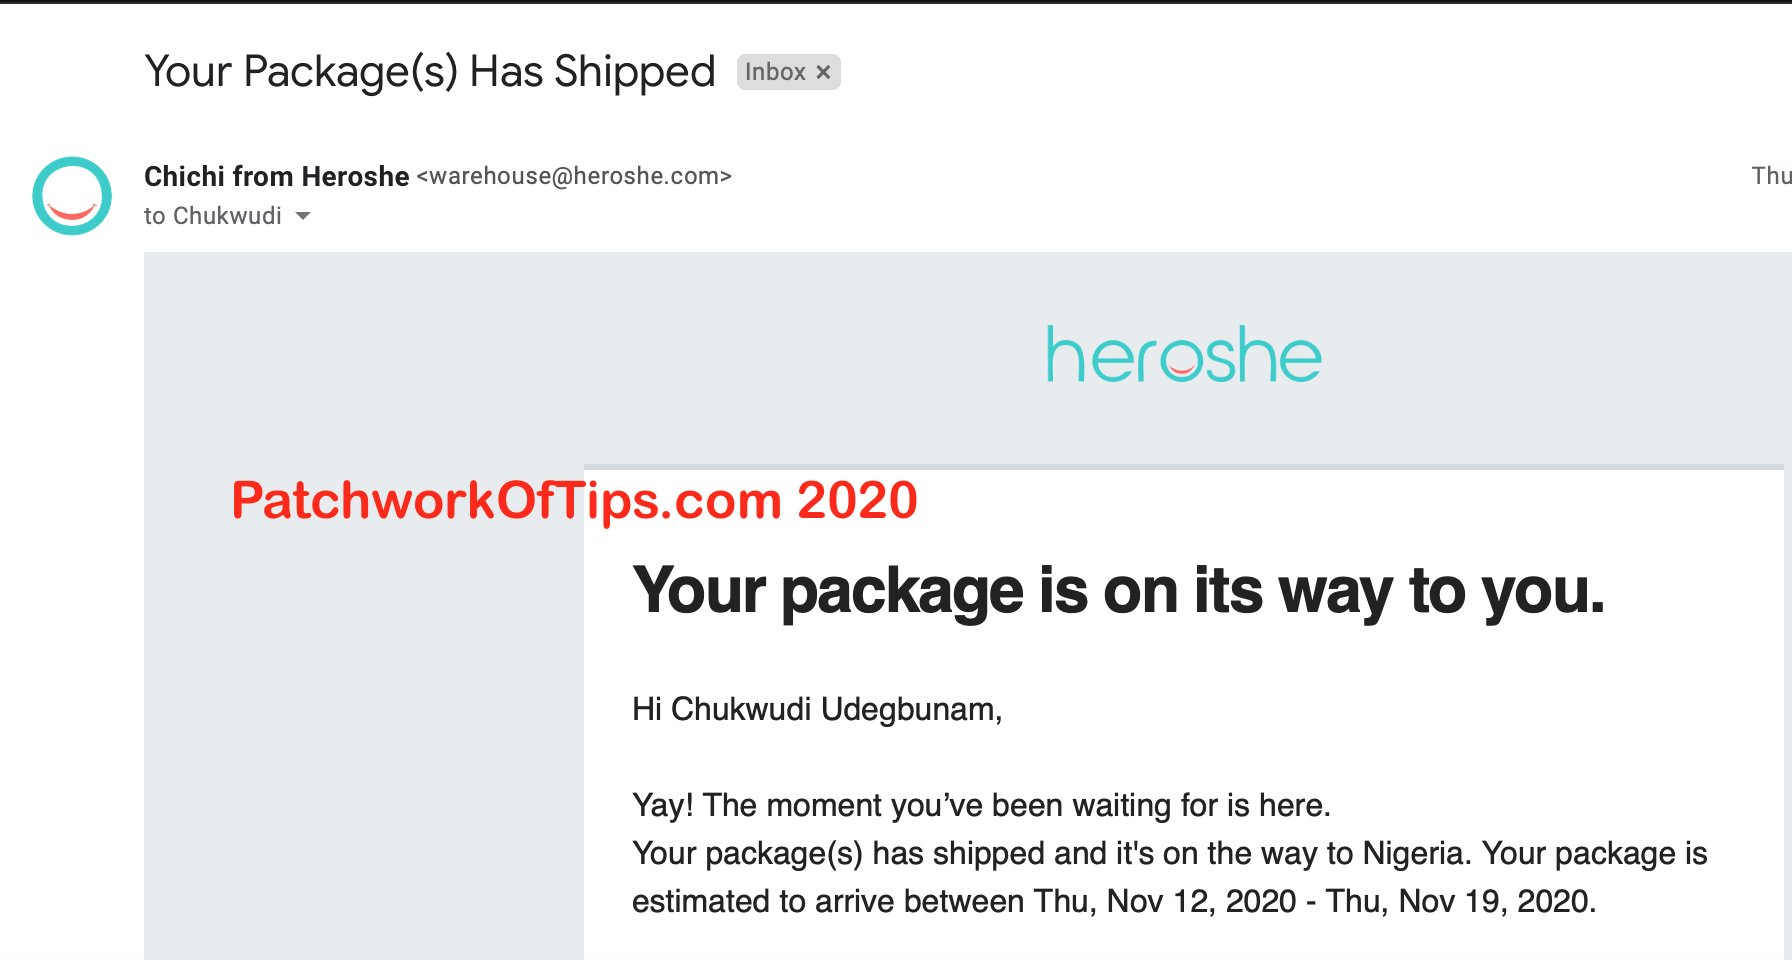 Heroshe Your Package(s) Has Shipped